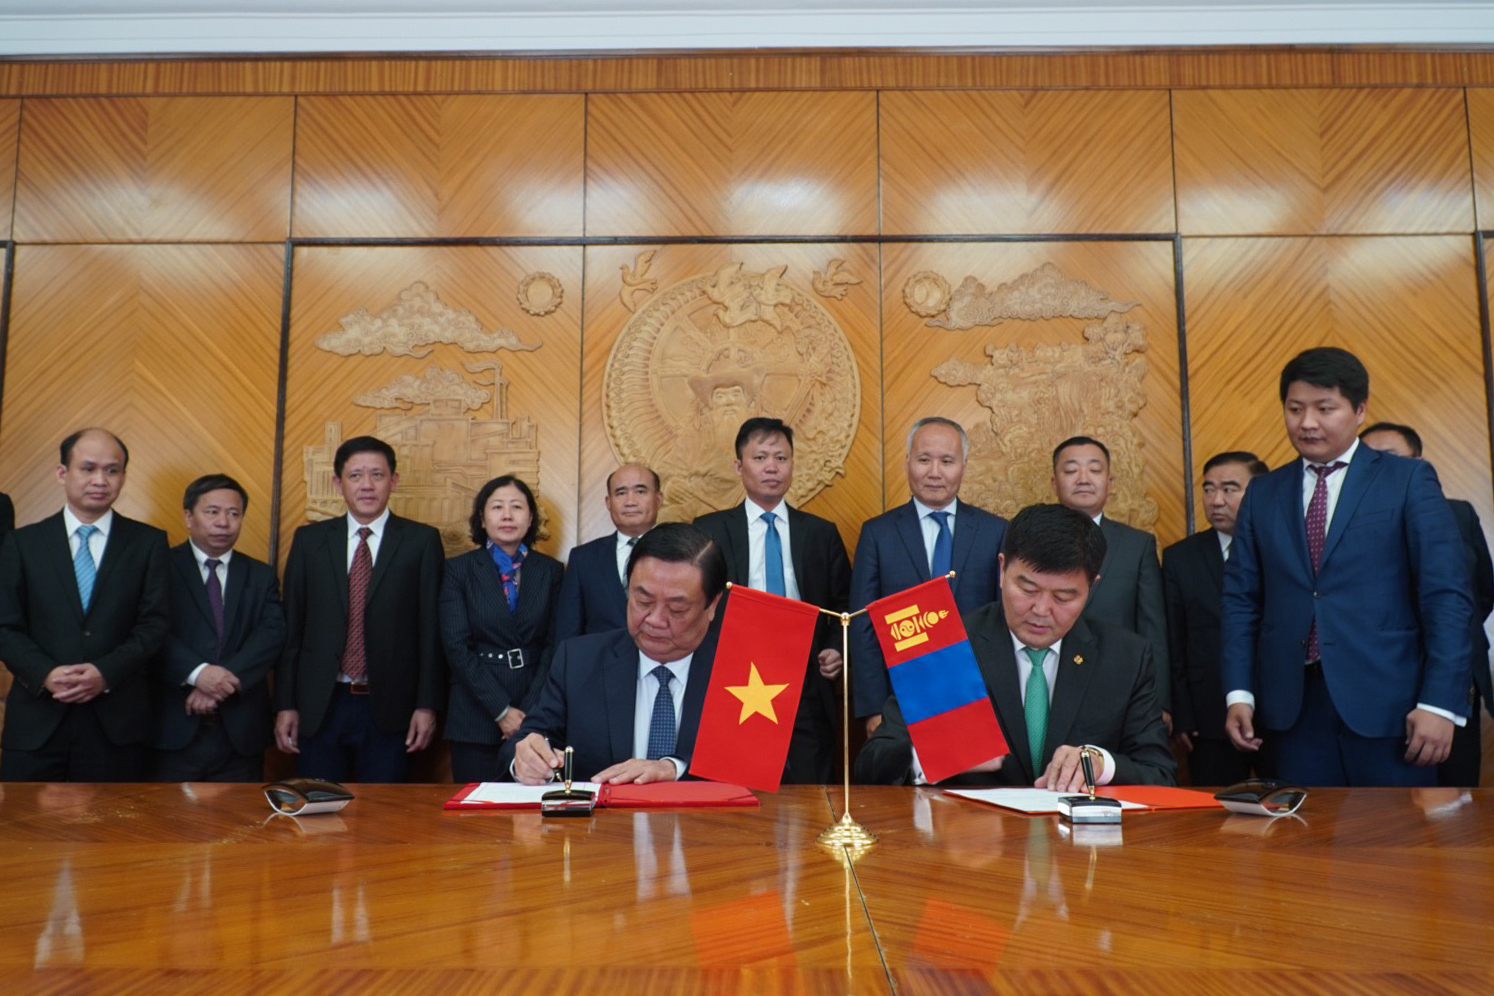 Minister Le Minh Hoan and Minister Khayangaa Bolorchuluun signed the first Memorandum of Understanding on Agricultural Cooperation between Vietnam and Mongolia. Photo: Anh Tuan.